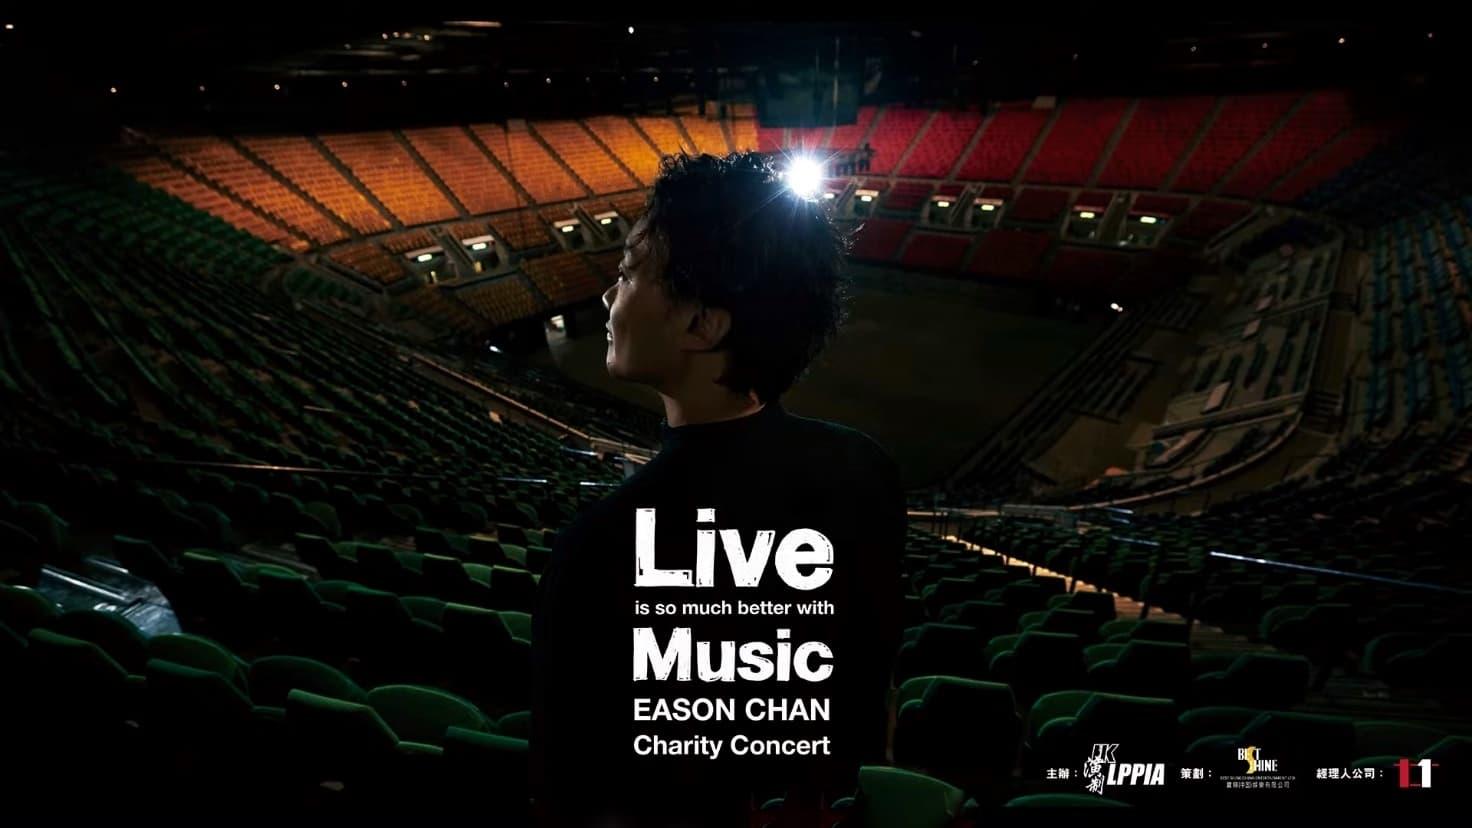 Live is so much better with Music Eason Chan Charity Concert backdrop